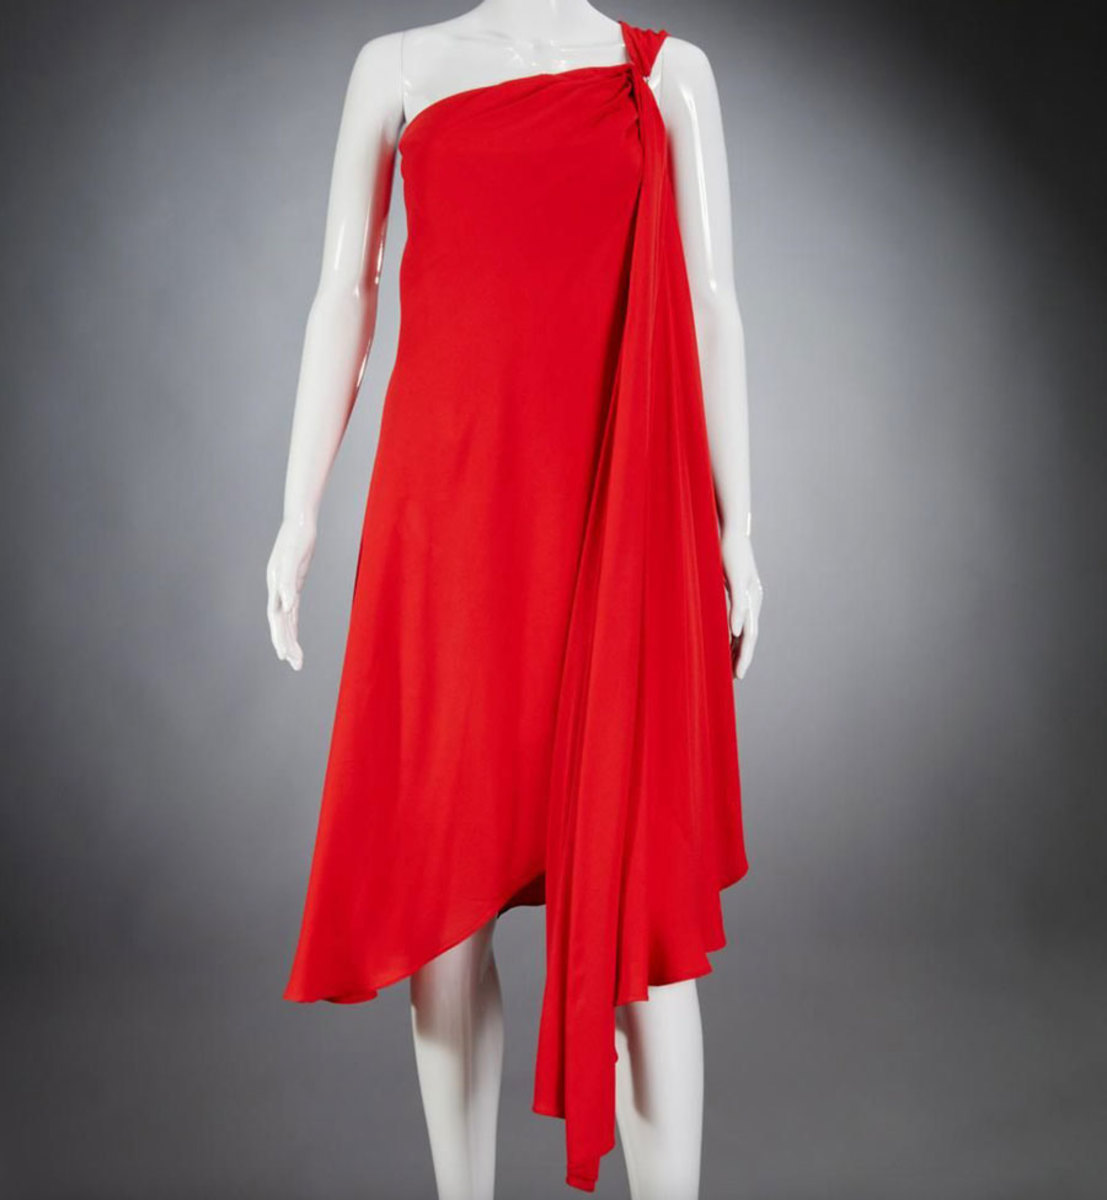 Textiles is the No. 1 trend in the 40 to 60 age group, including vintage clothing by Chanel, Halston and Missoni. This Halston red one-shoulder cocktail dress, c. 1970s, has an iconic draped silhouette with cascading sleeve, $450.